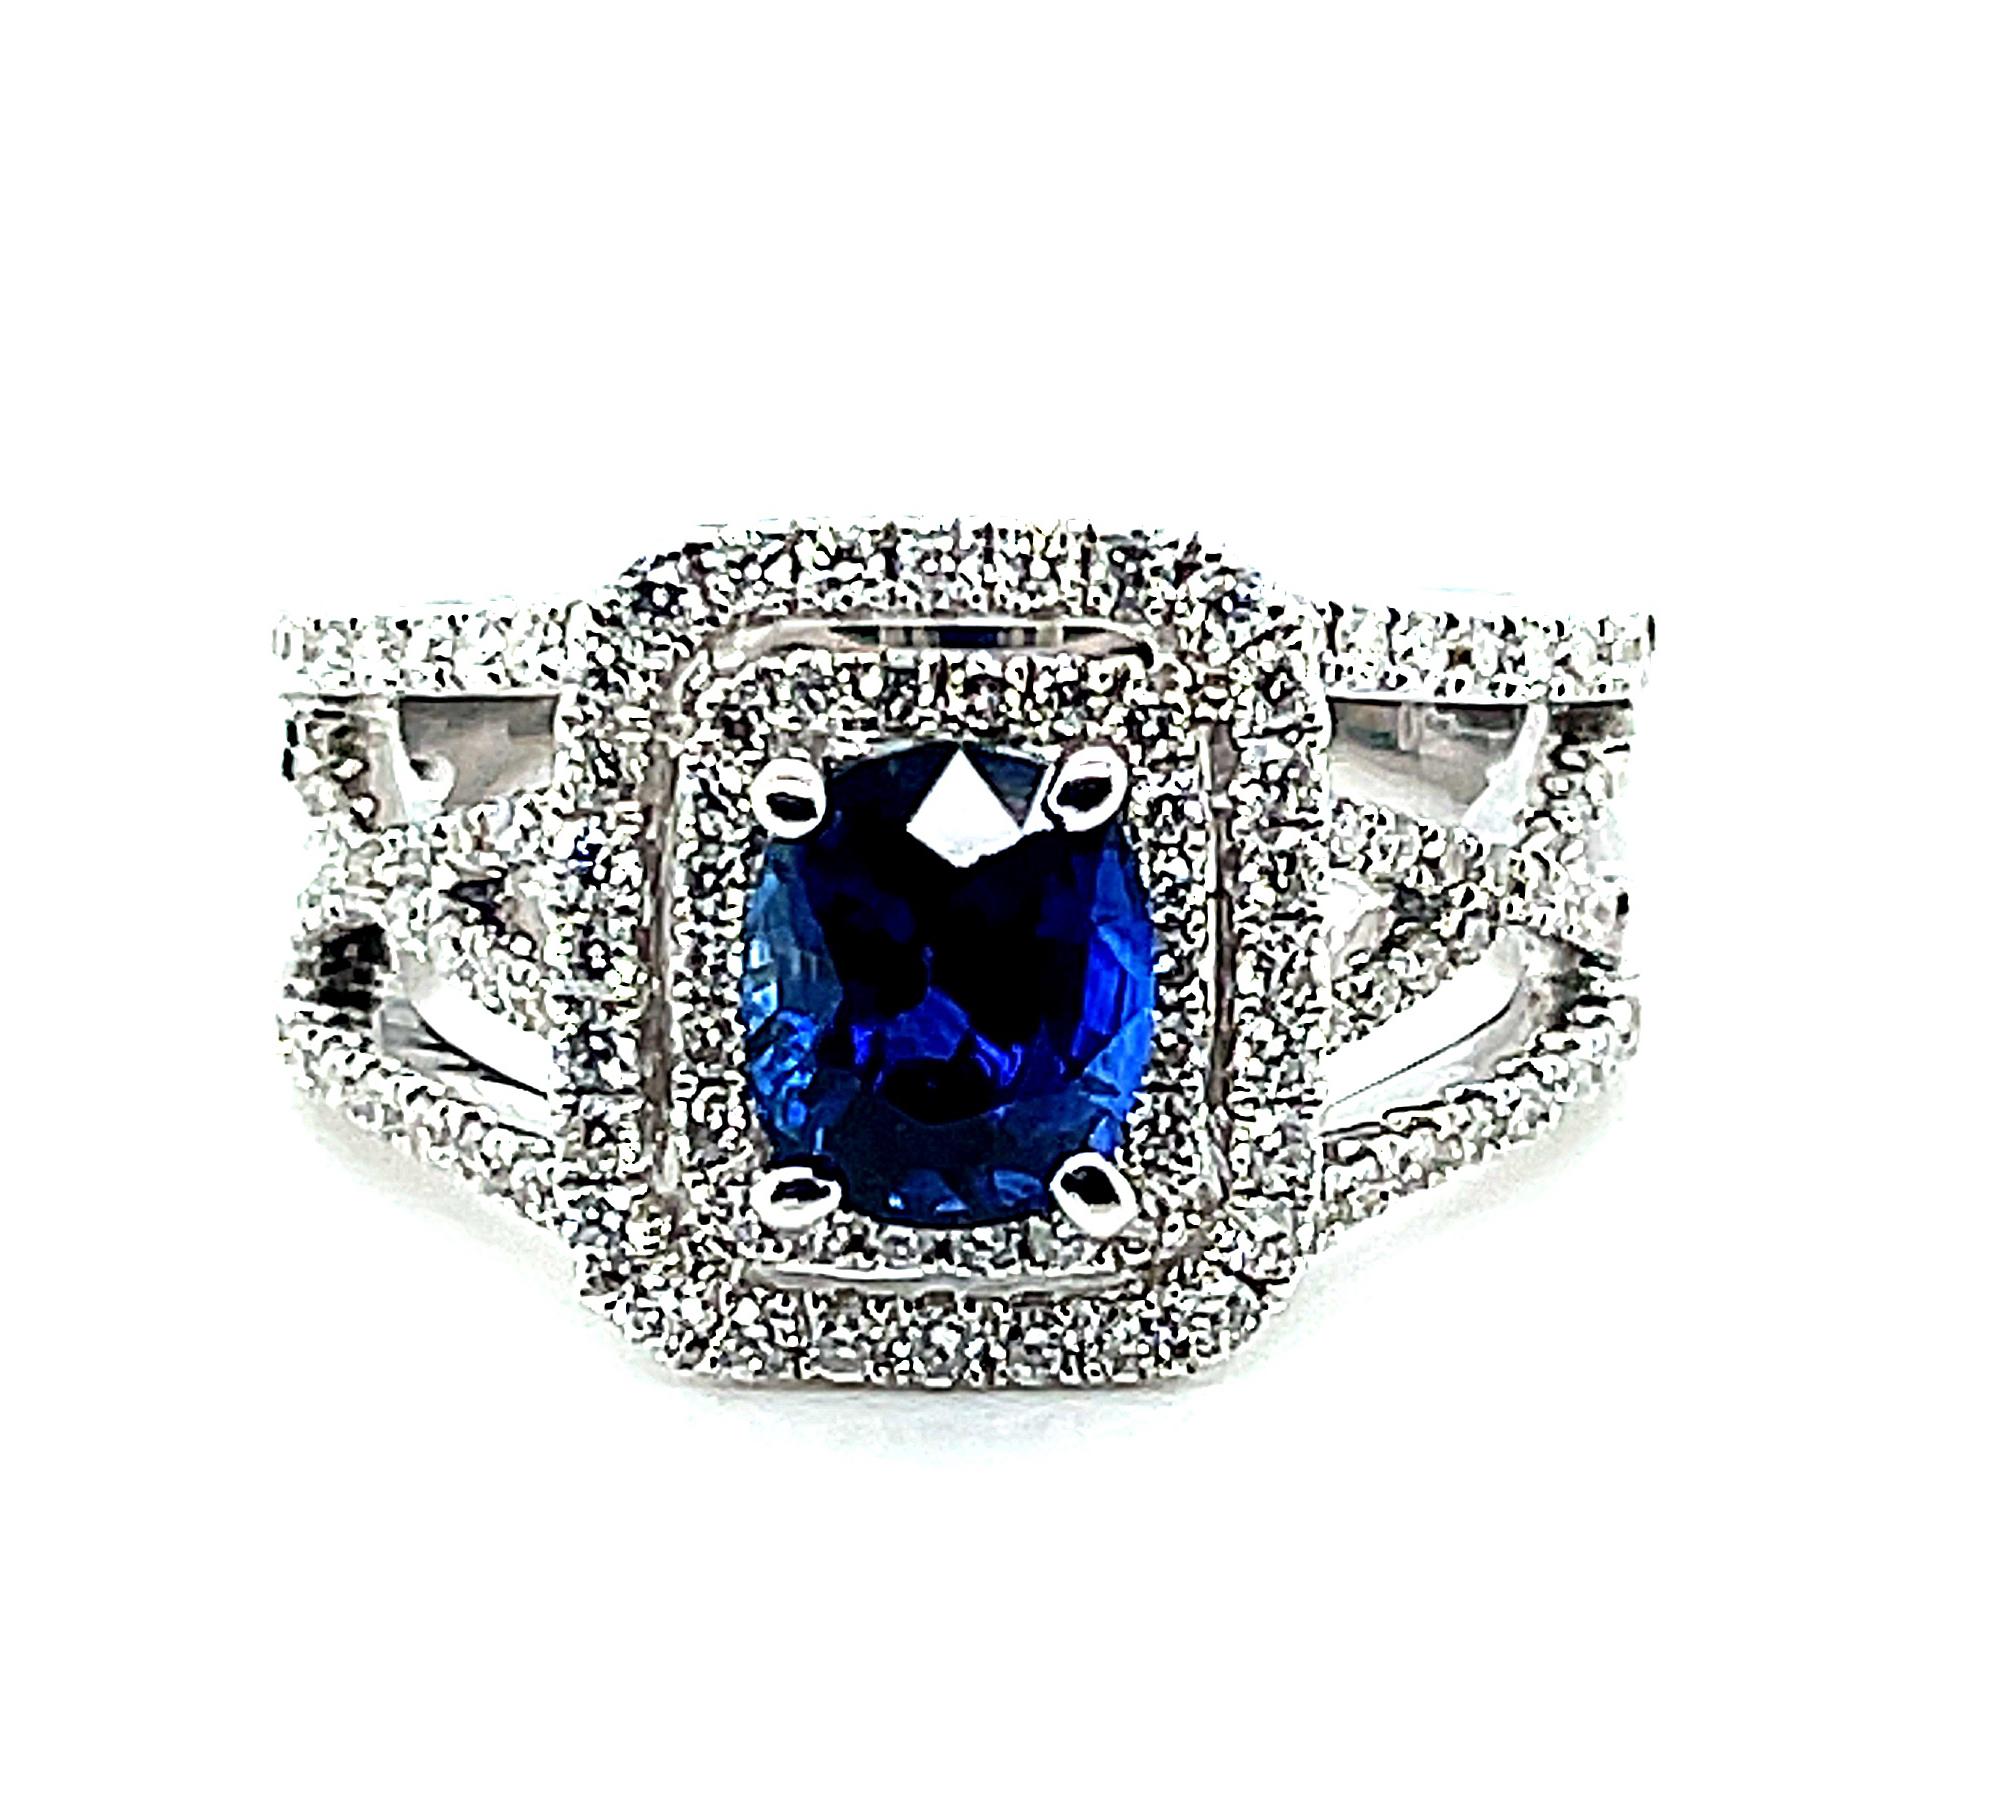 This gorgeous sapphire ring is a perfect blend of timeless elegance and contemporary sophistication. It starts with a velvety 1.69 carat blue sapphire framed in a double halo of sparkling diamonds, then takes an updated turn with multiple lines of